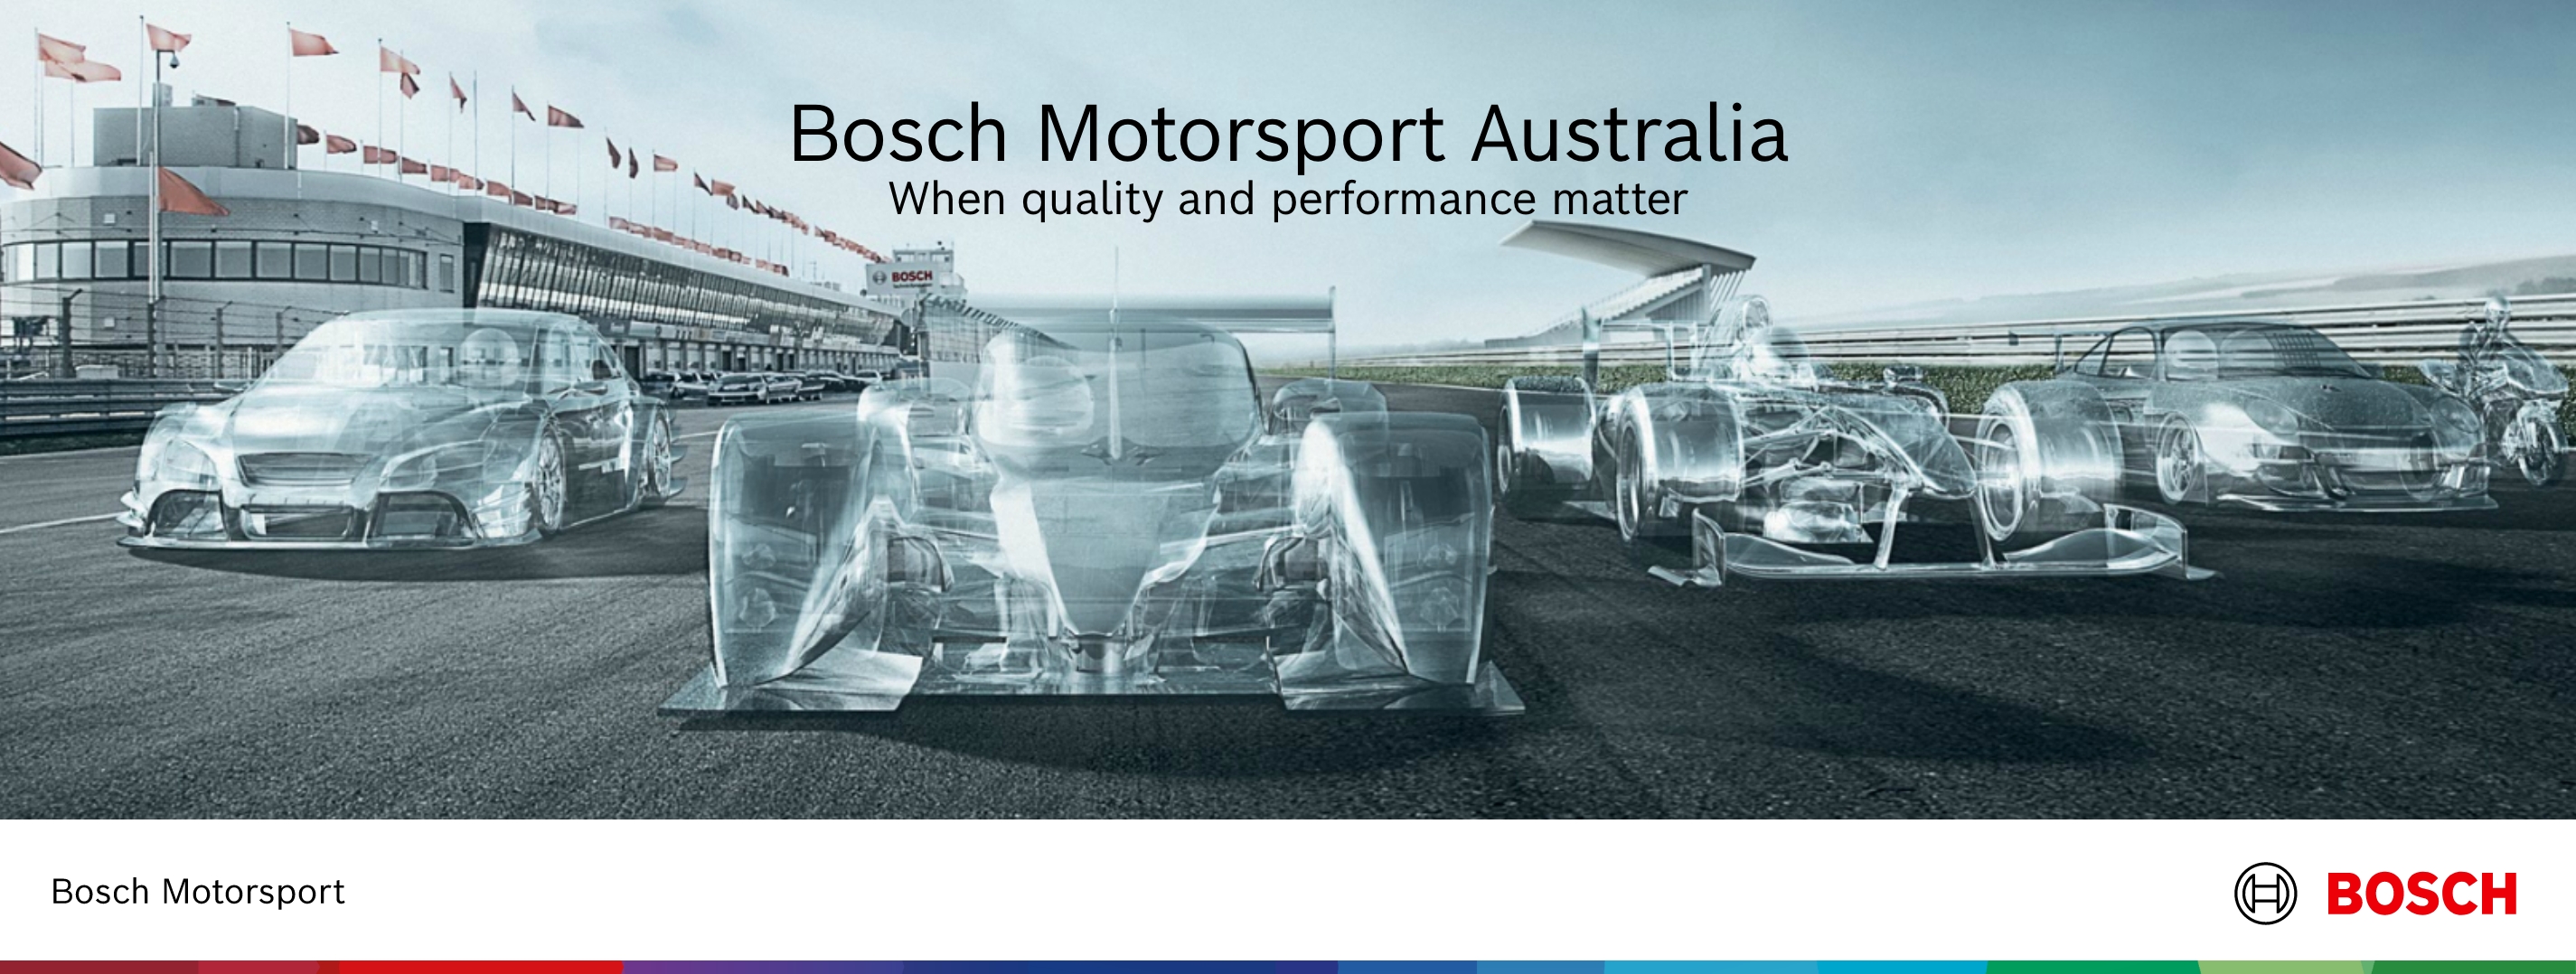 Bosch Motorsport Australia, New Zealand & South Africa - Online webshop for  High Peformance products